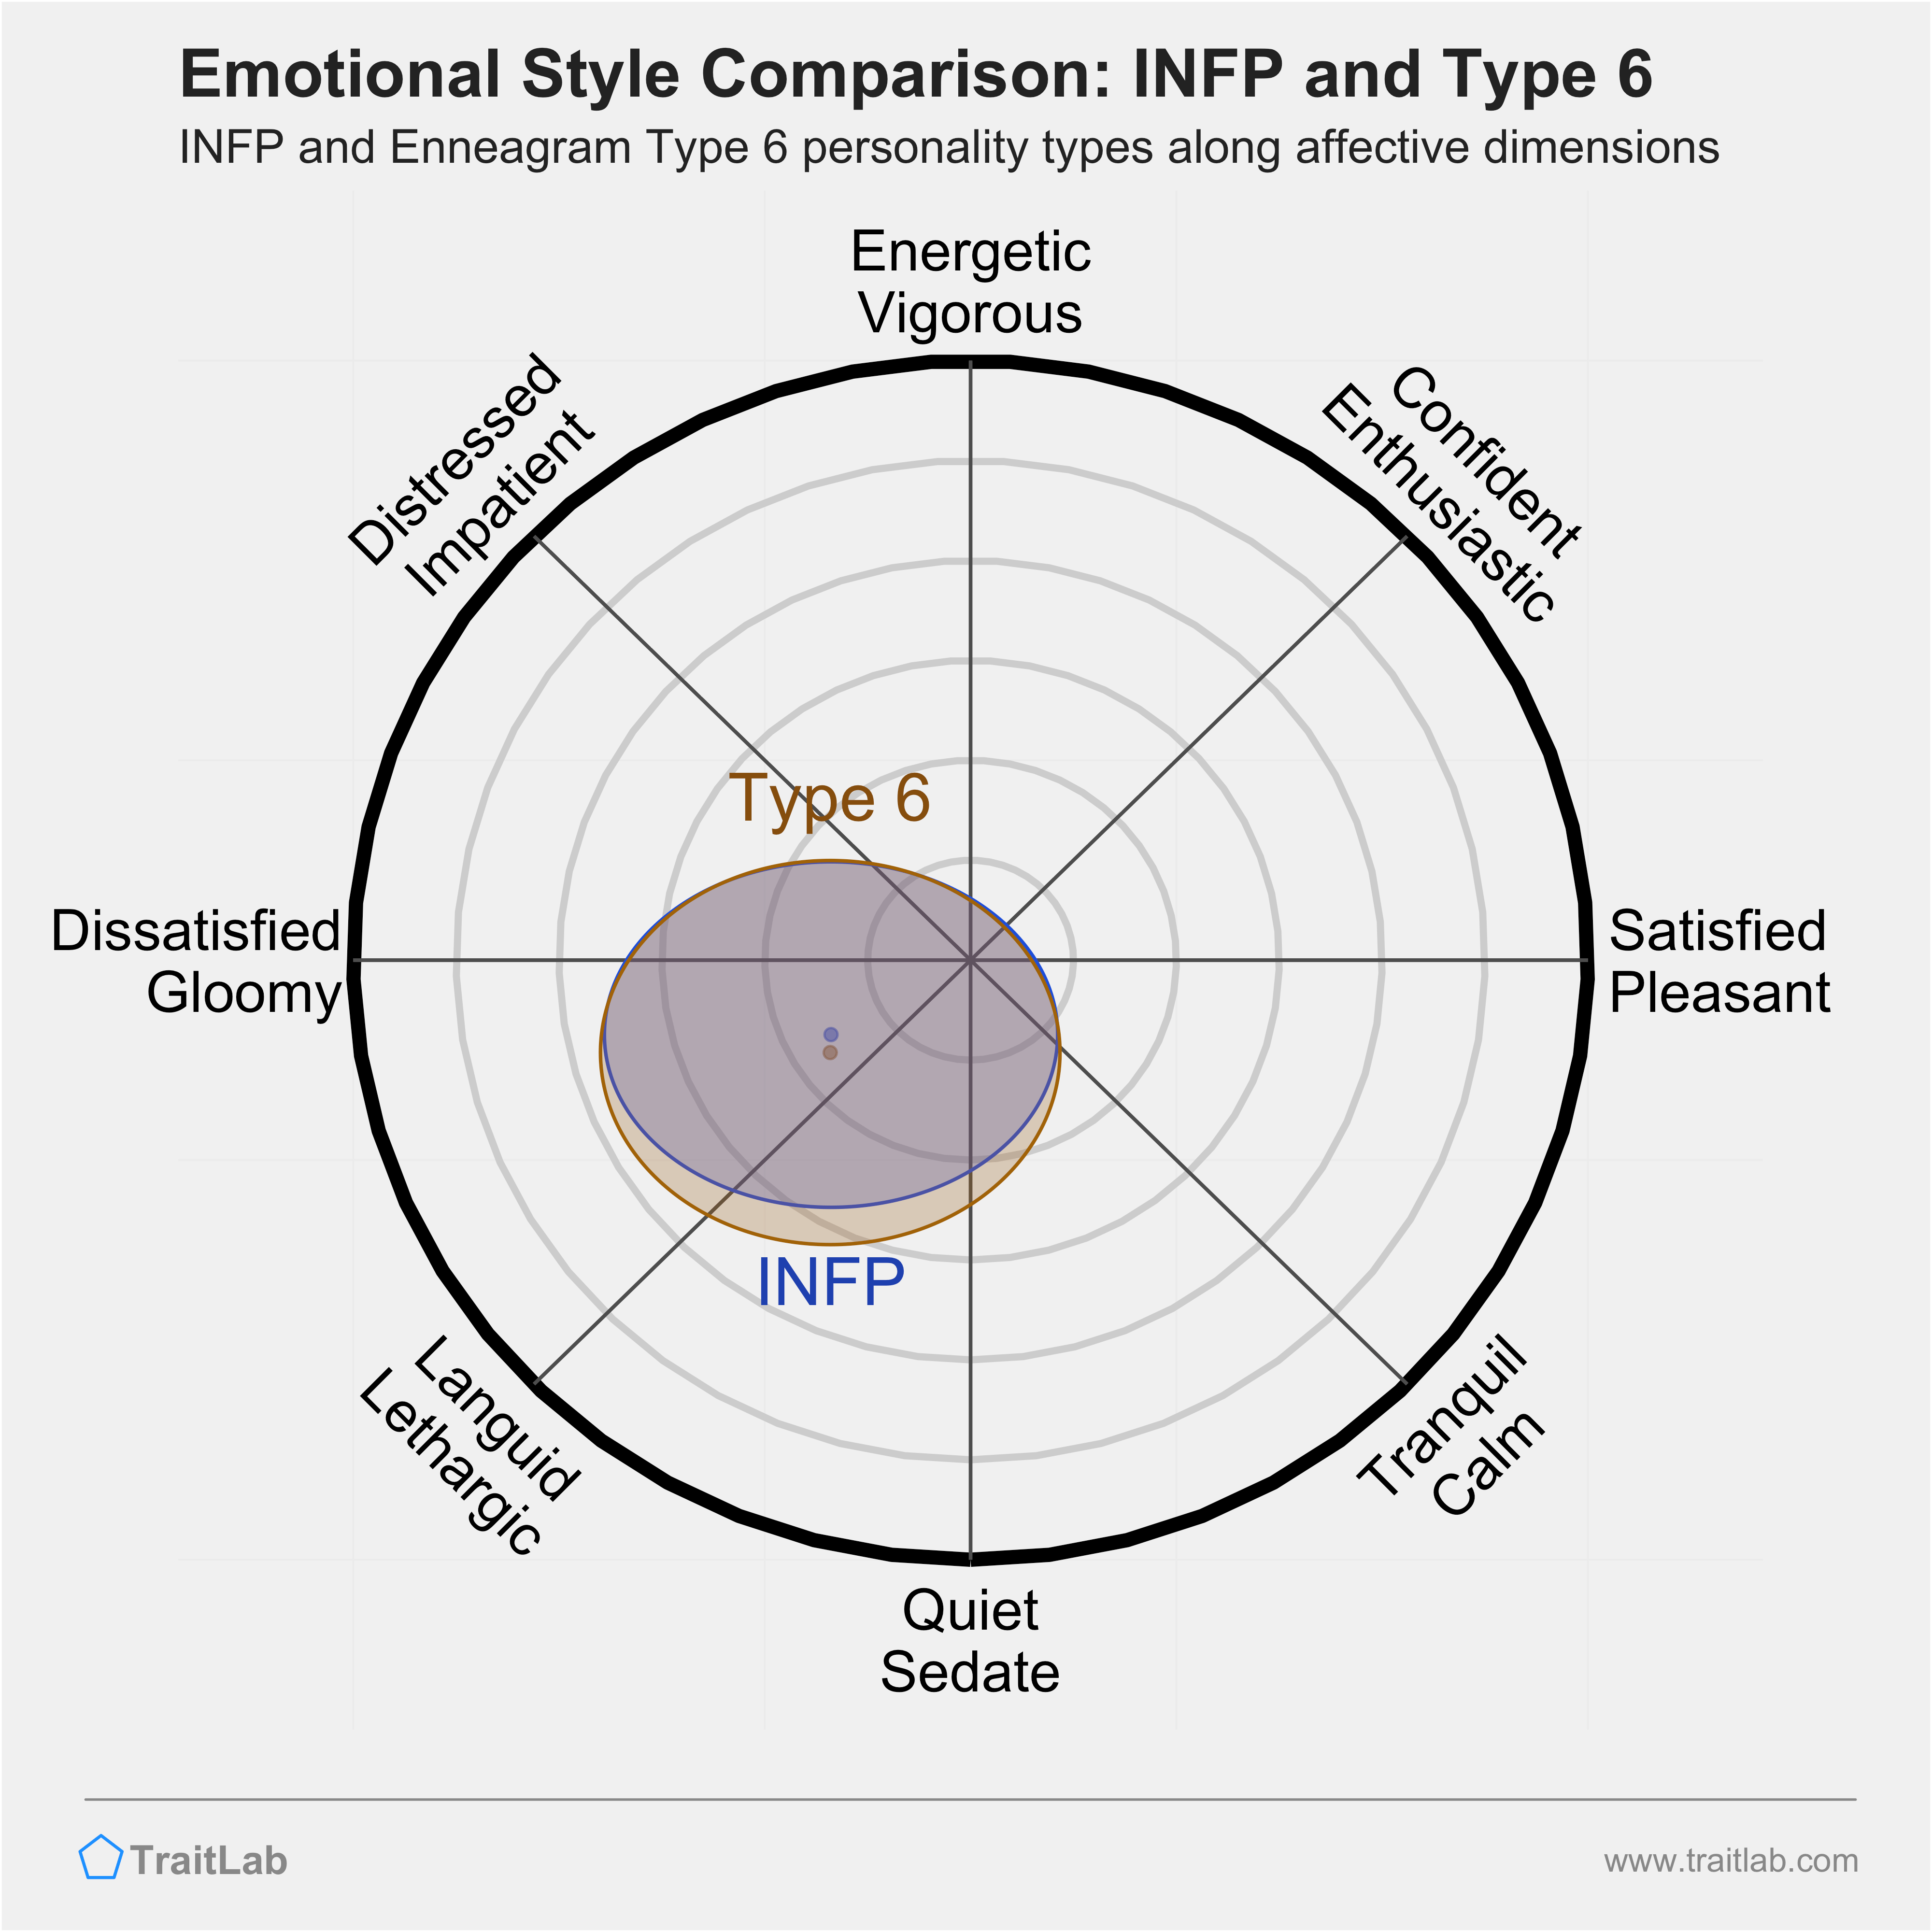 INFP and Type 6 comparison across emotional (affective) dimensions